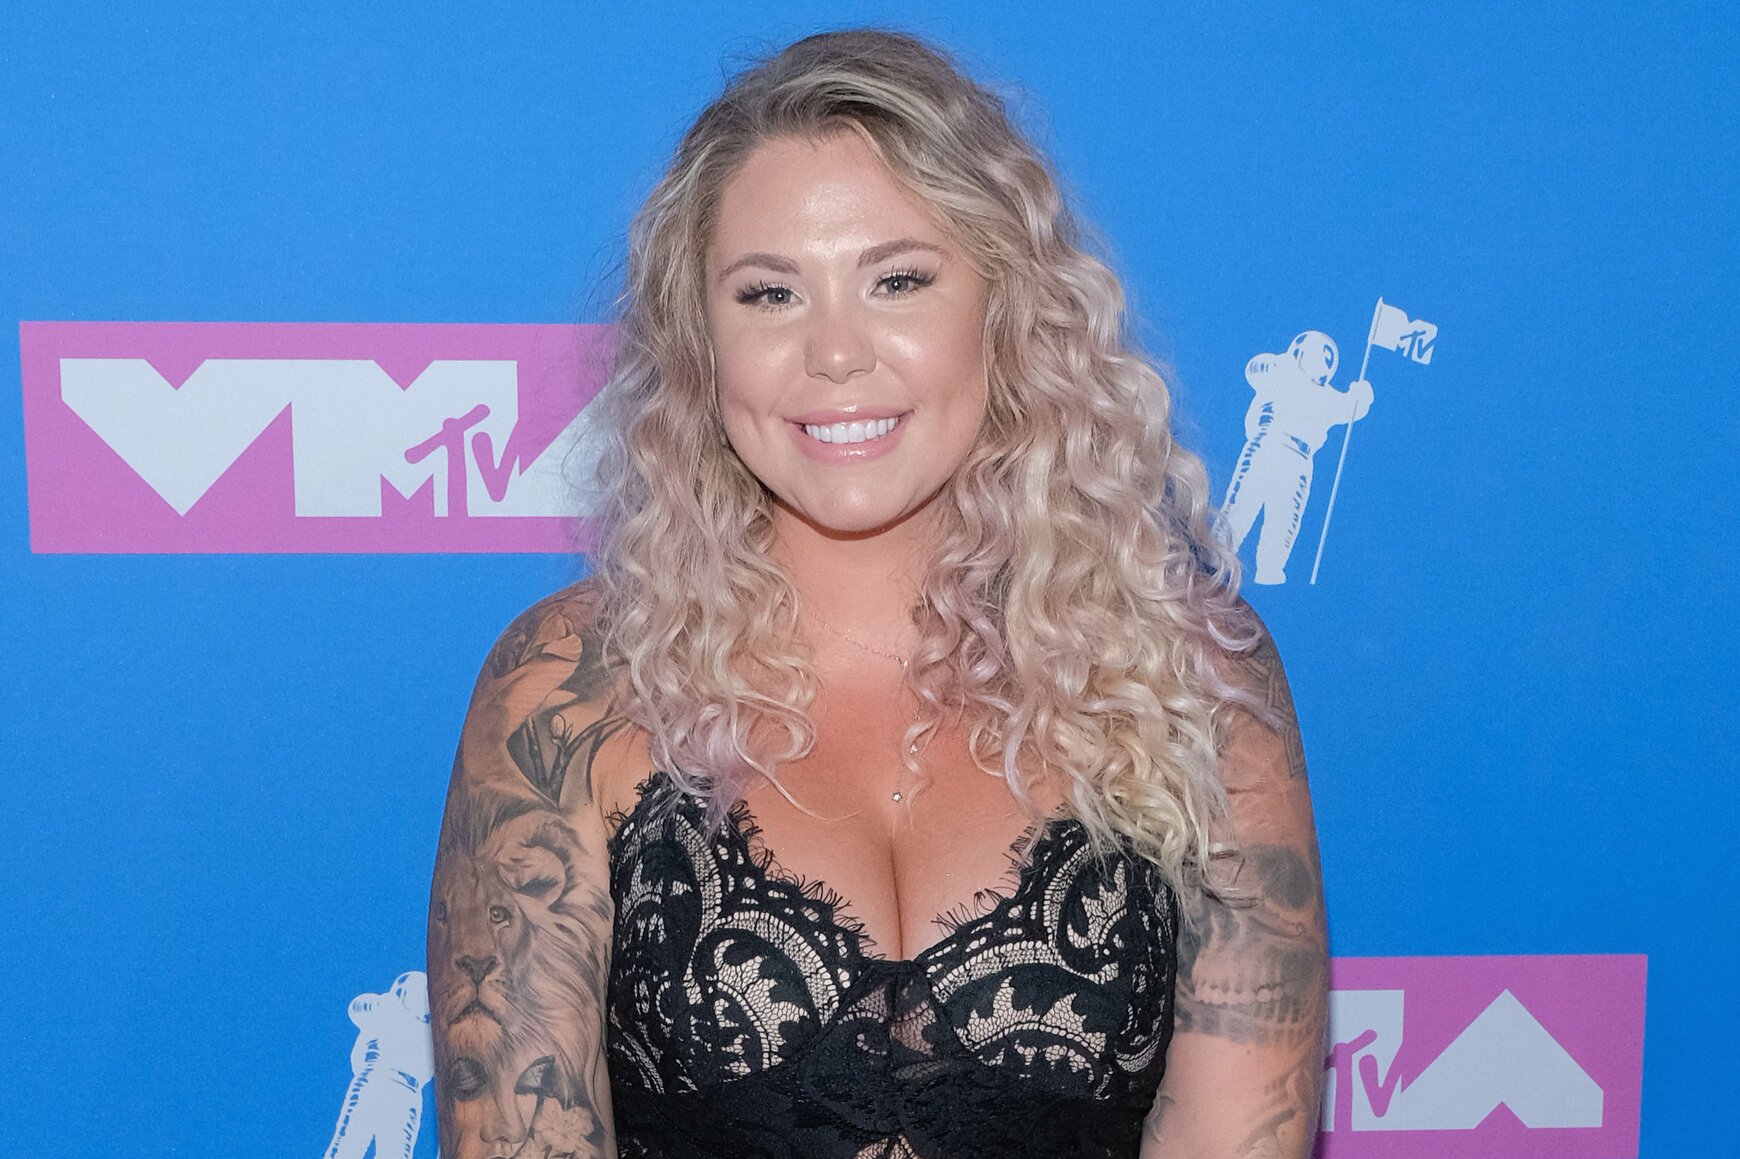 Kailyn Lowry at the 2018 MTV Video Music Awards in a black top